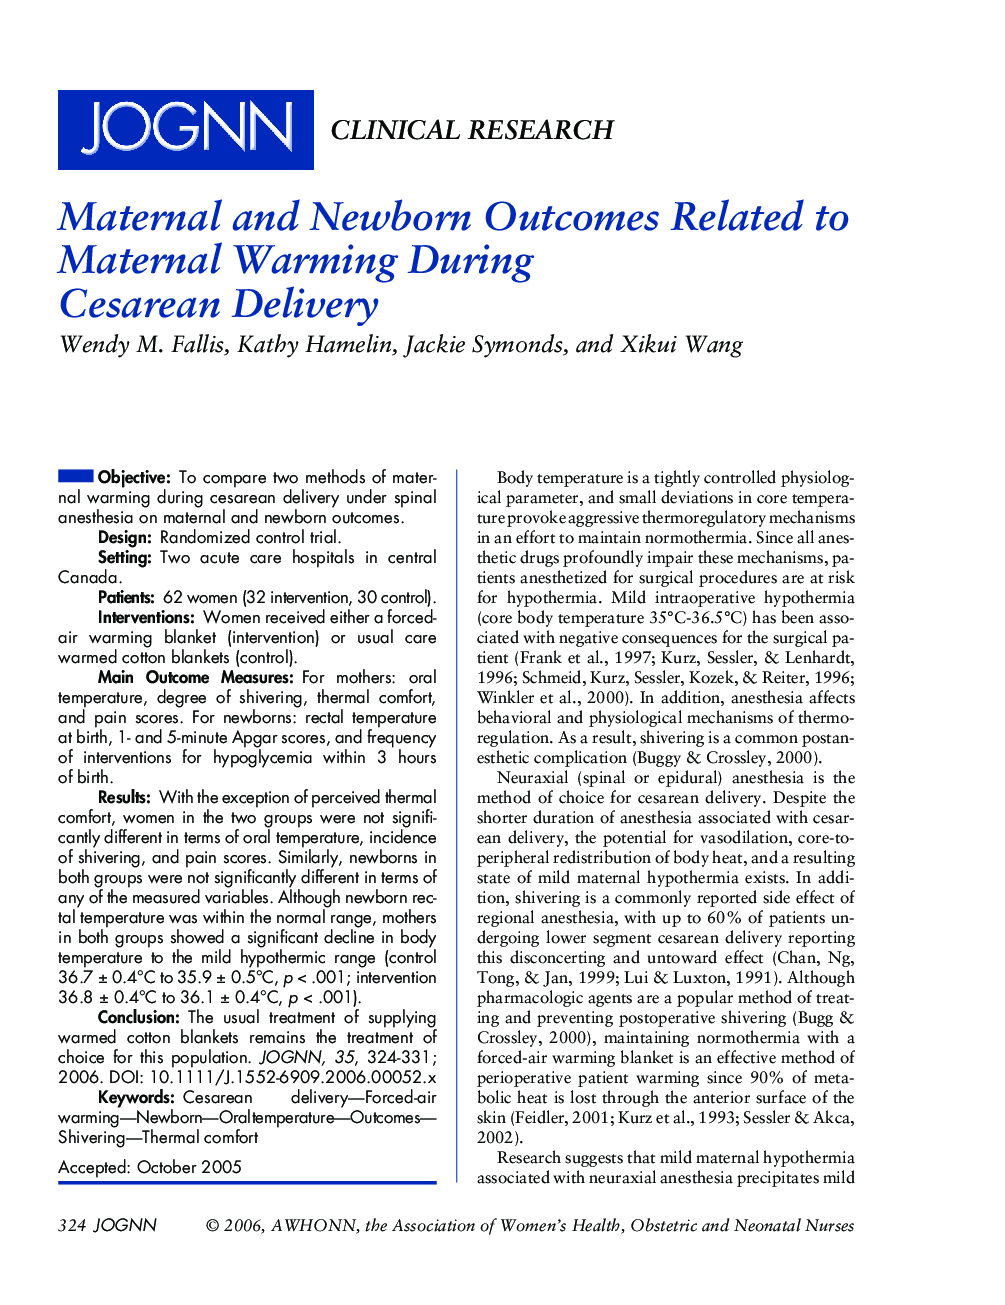 Maternal and Newborn Outcomes Related to Maternal Warming During Cesarean Delivery